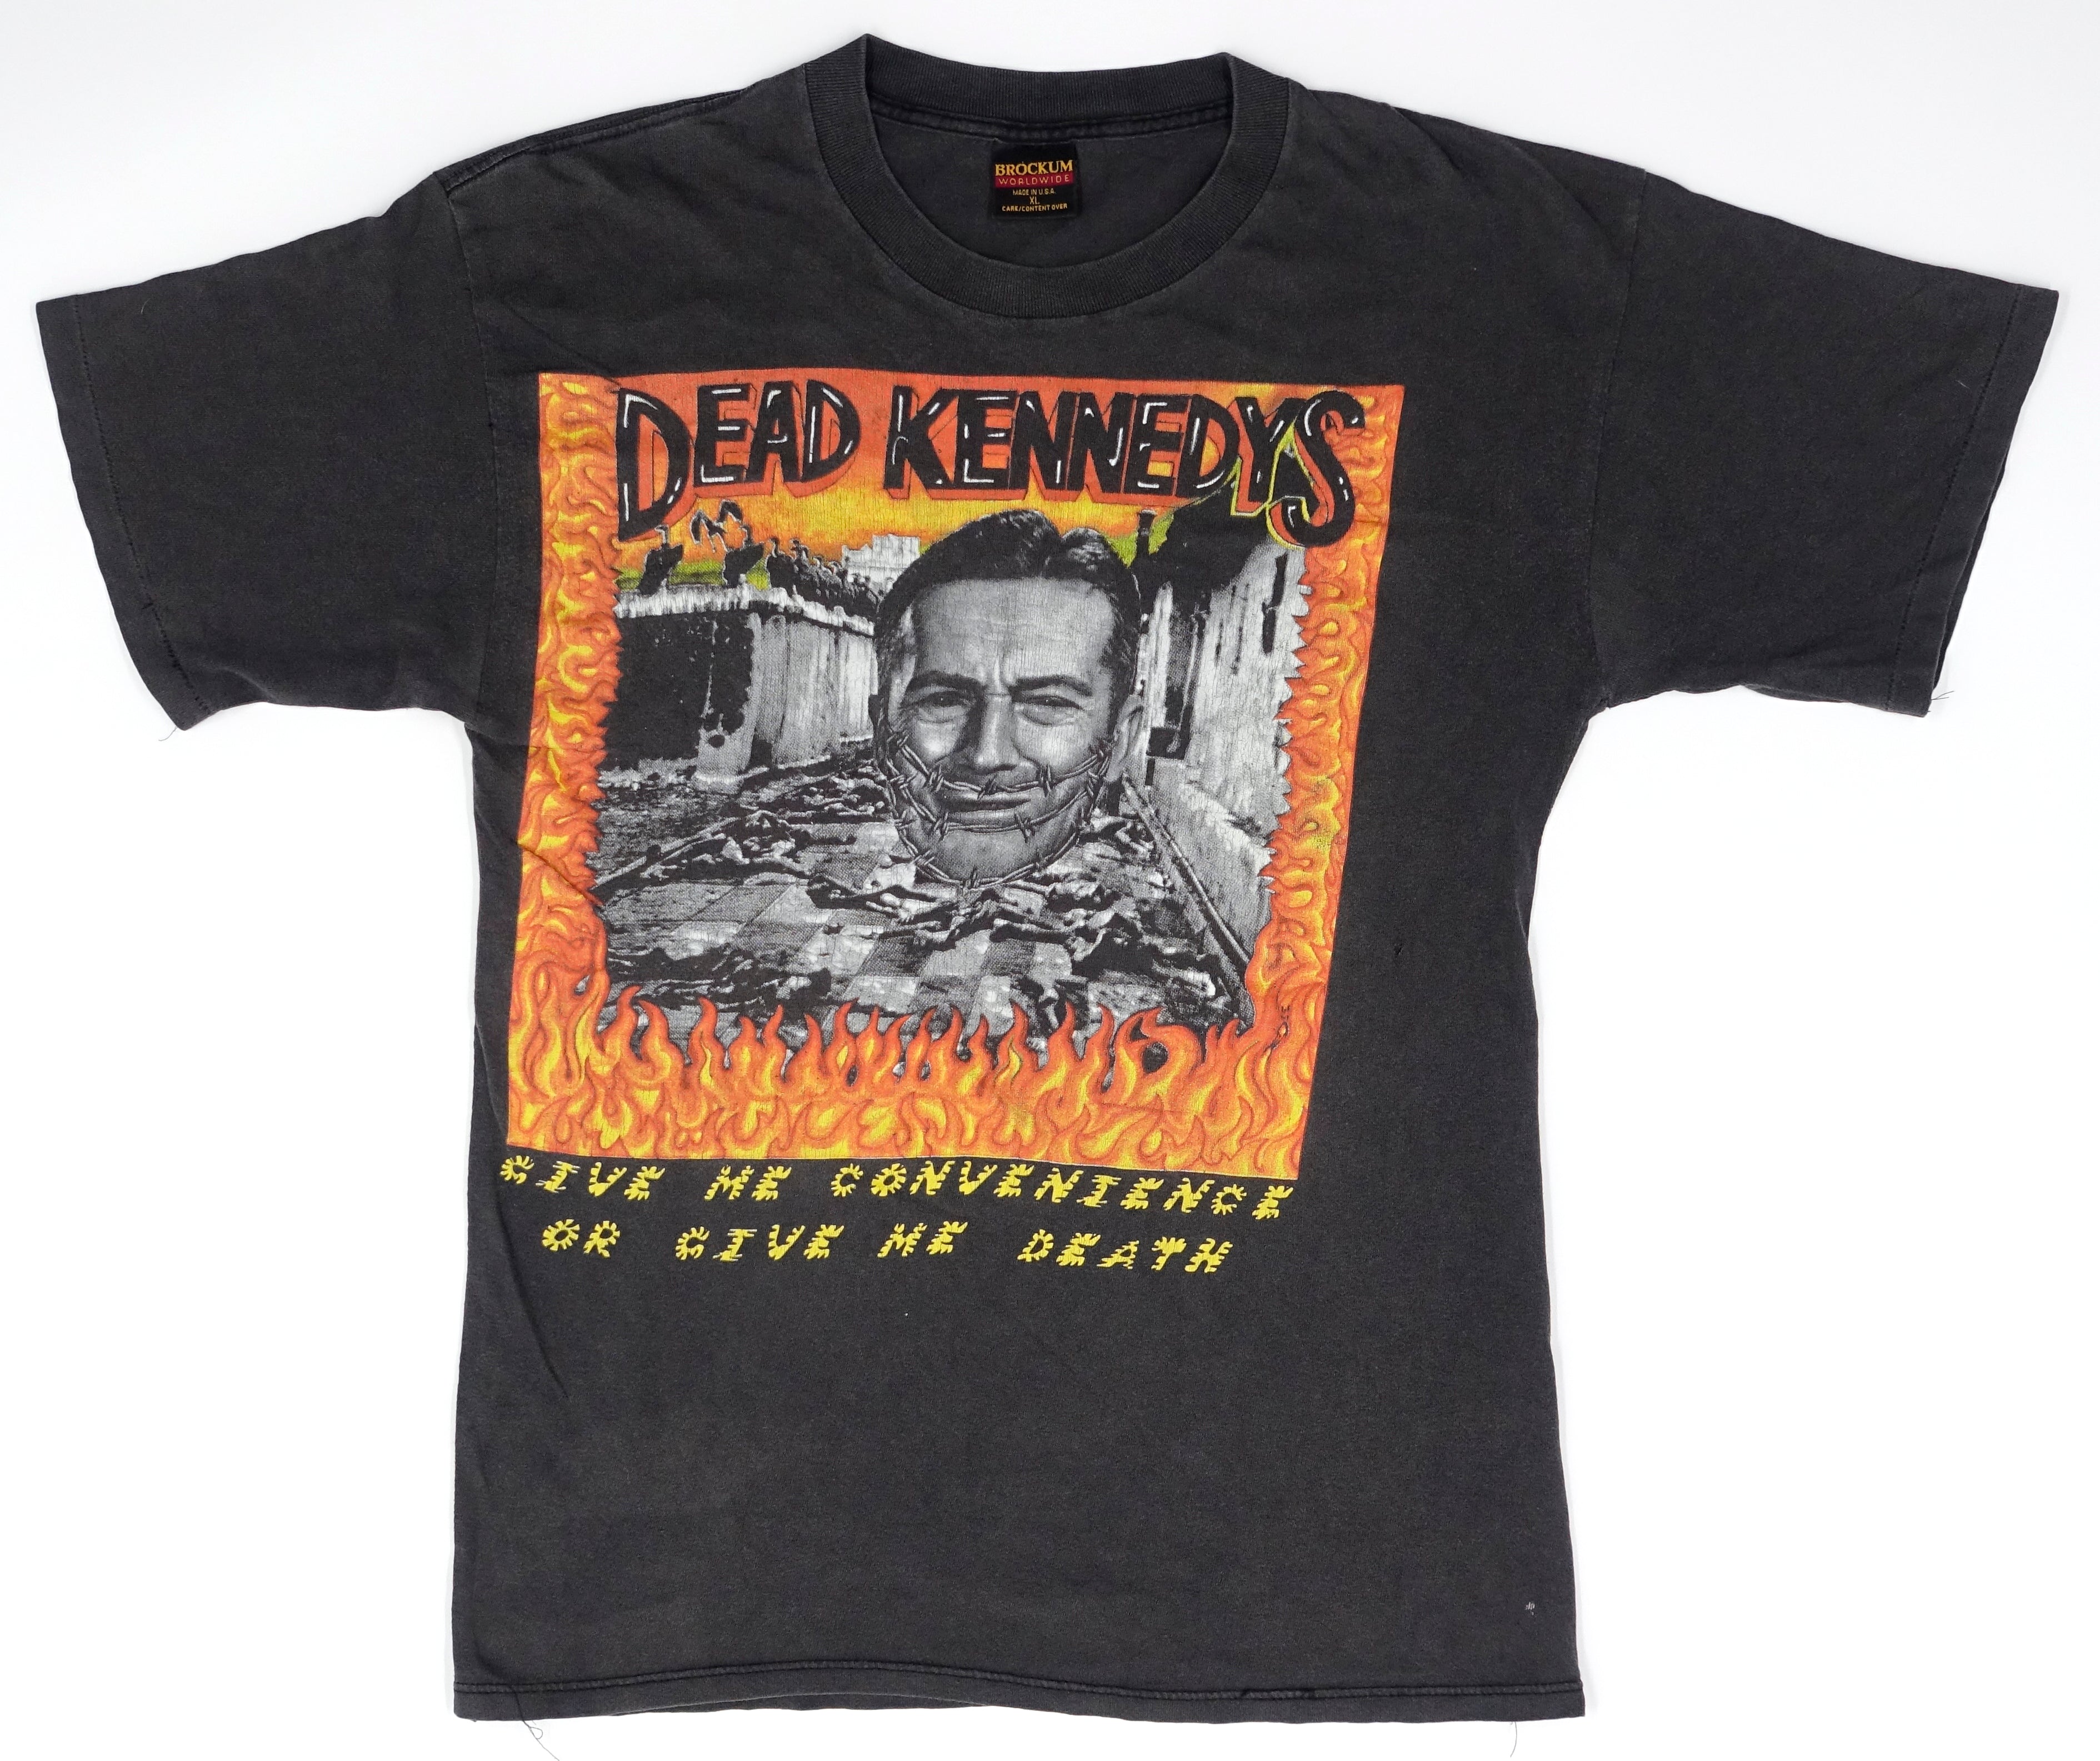 Dead Kennedys - Give Me Convenience Or Give Me Death ©199? Shirt Size XL